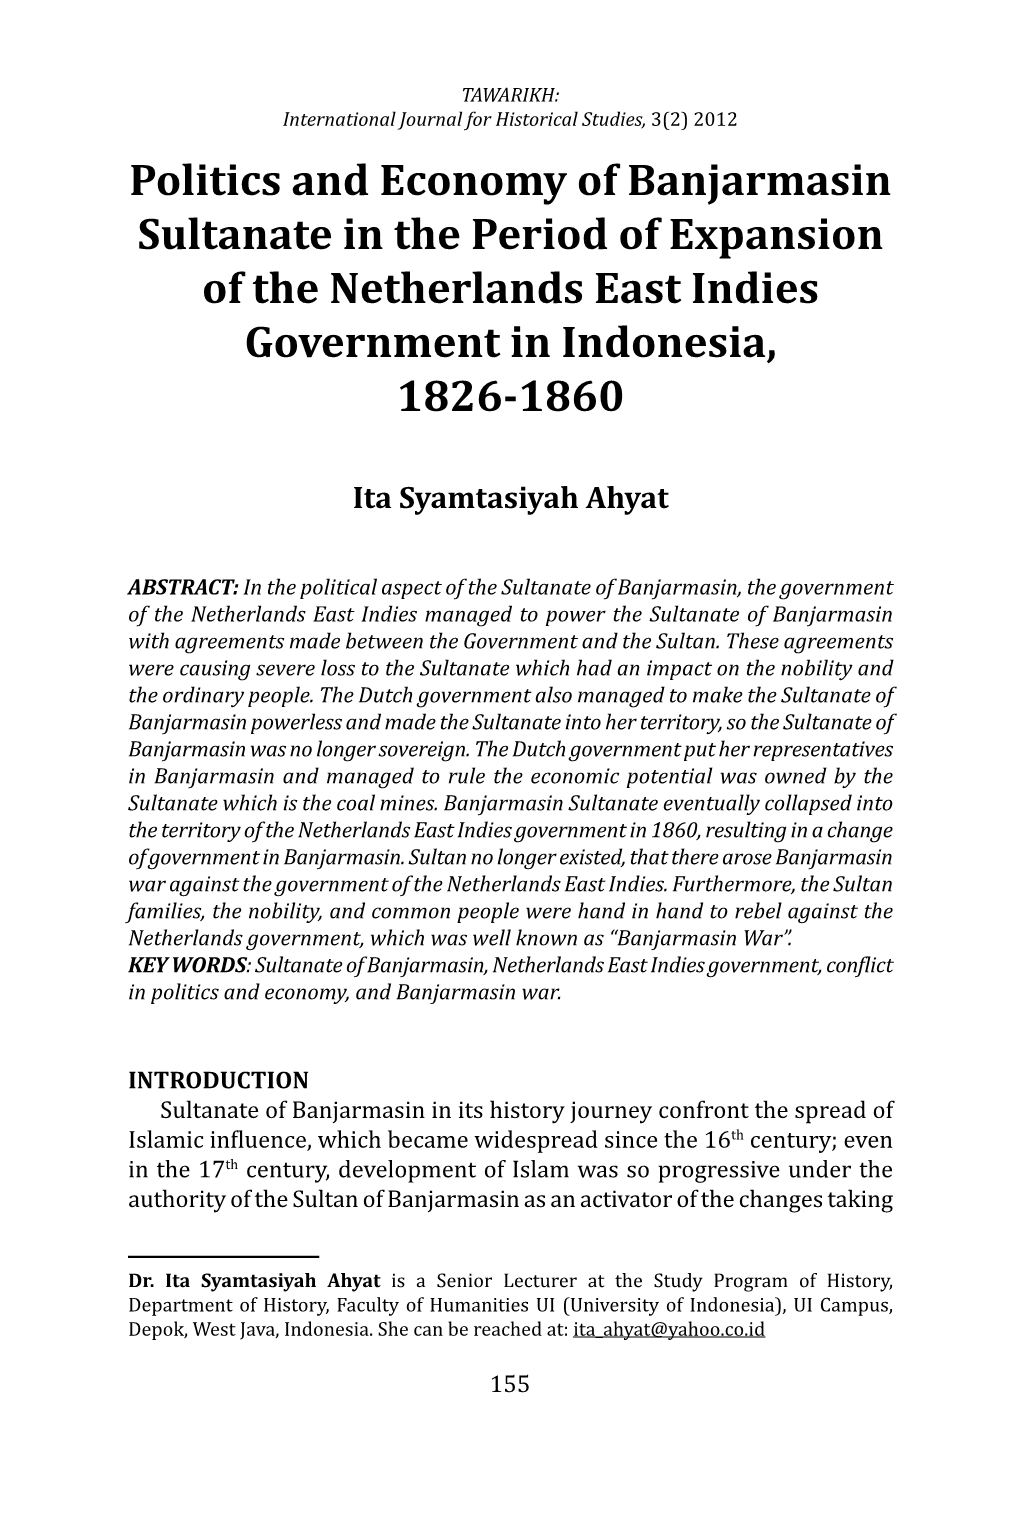 Politics and Economy of Banjarmasin Sultanate in the Period of Expansion of the Netherlands East Indies Government in Indonesia, 1826-1860